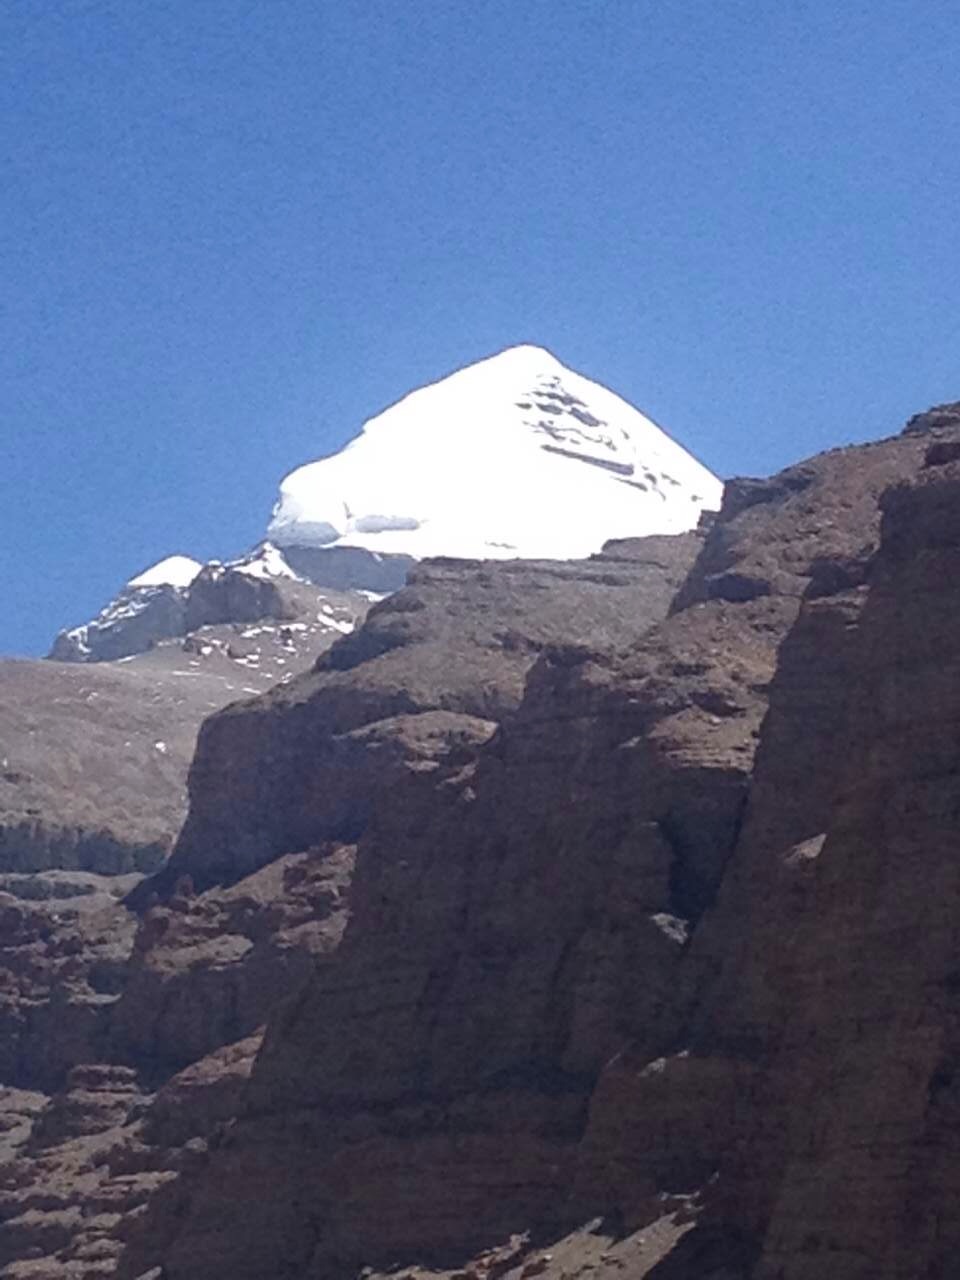 This is a picture taken by our customer at the foot of Mt. Kailash.